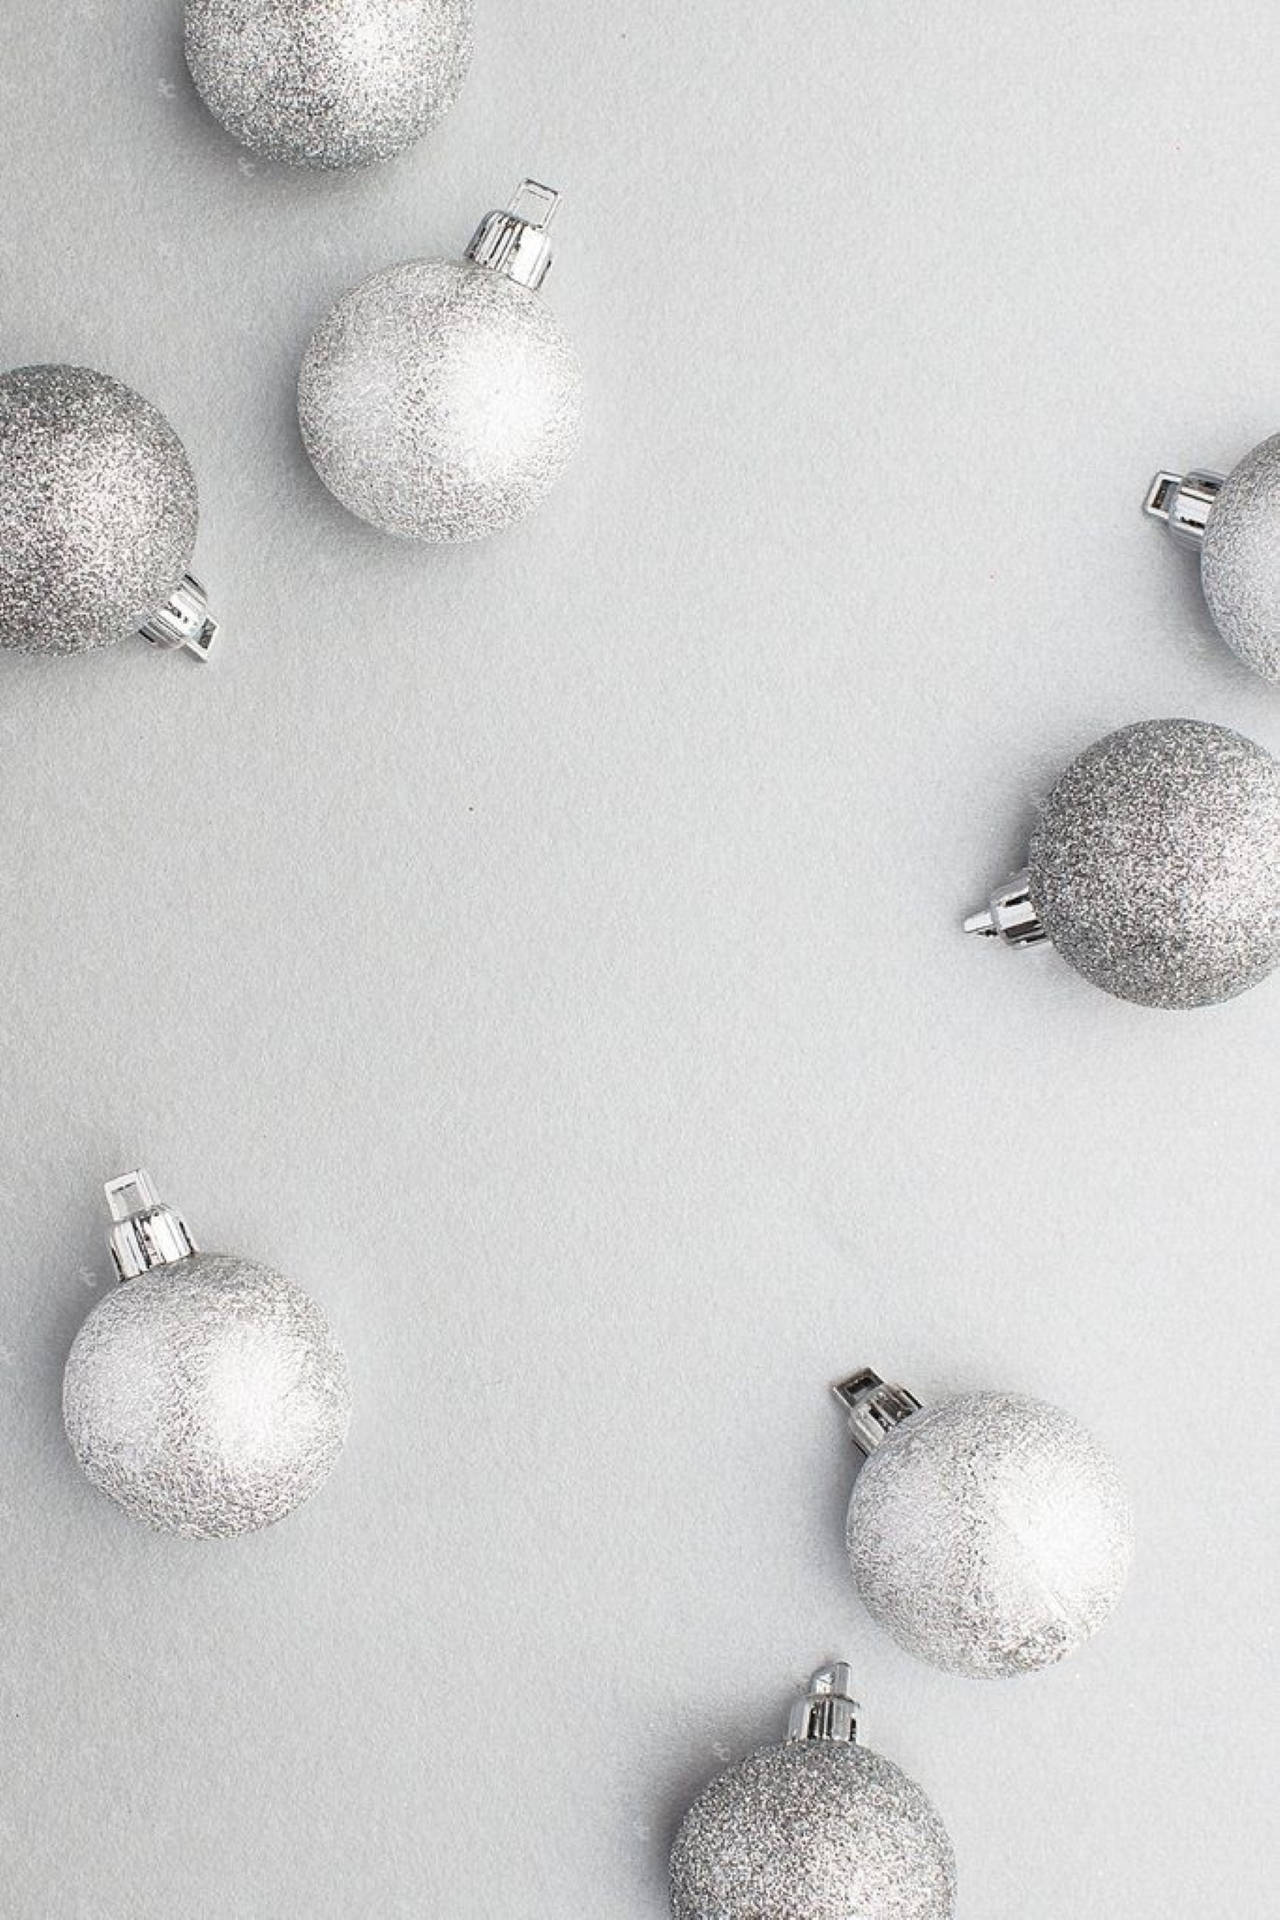 A bunch of silver and white ornaments on the ground - Silver